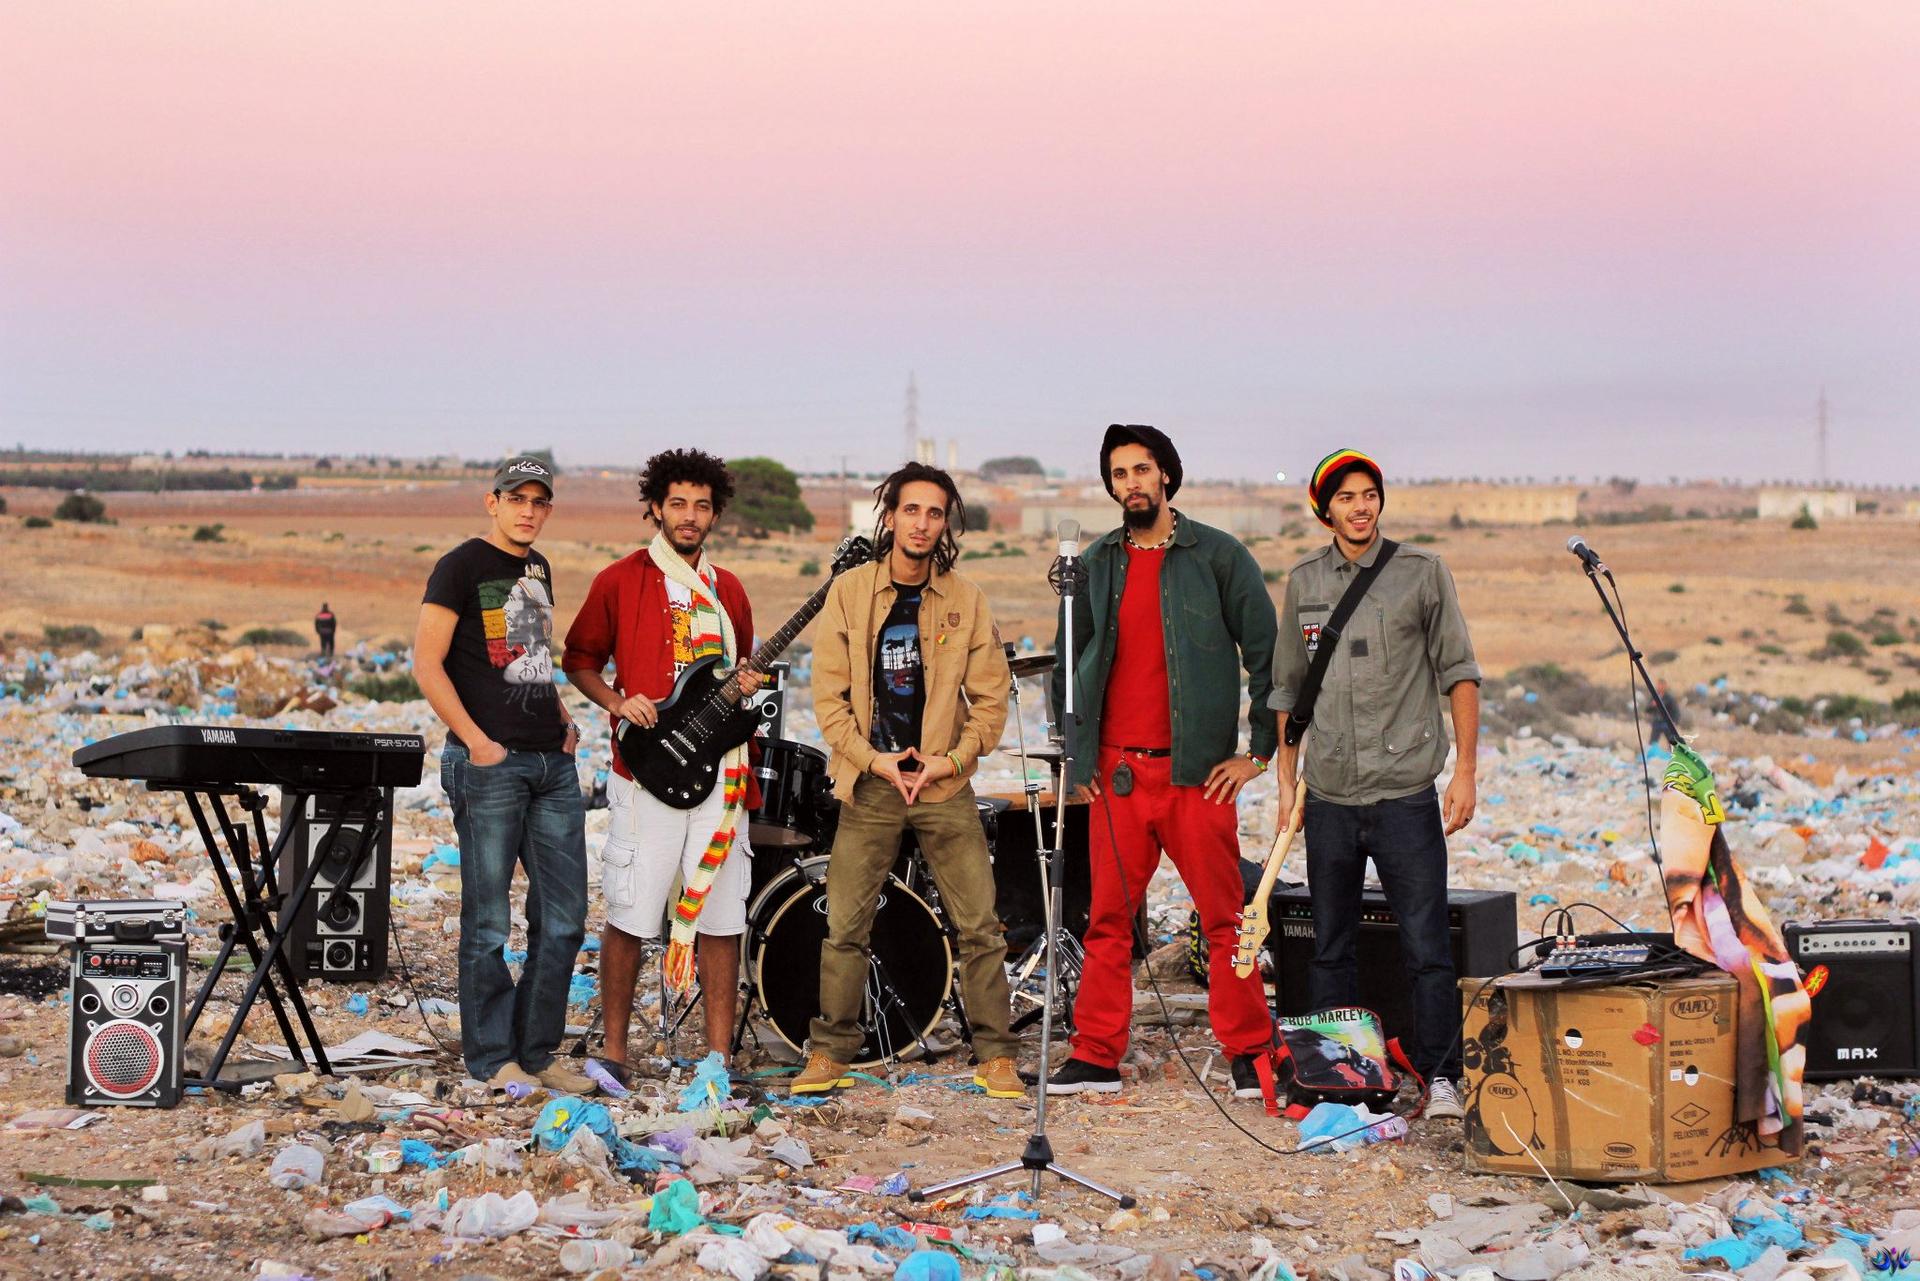 Democratoz is an Algerian Rai and Reggae band based out of the city of Oran.